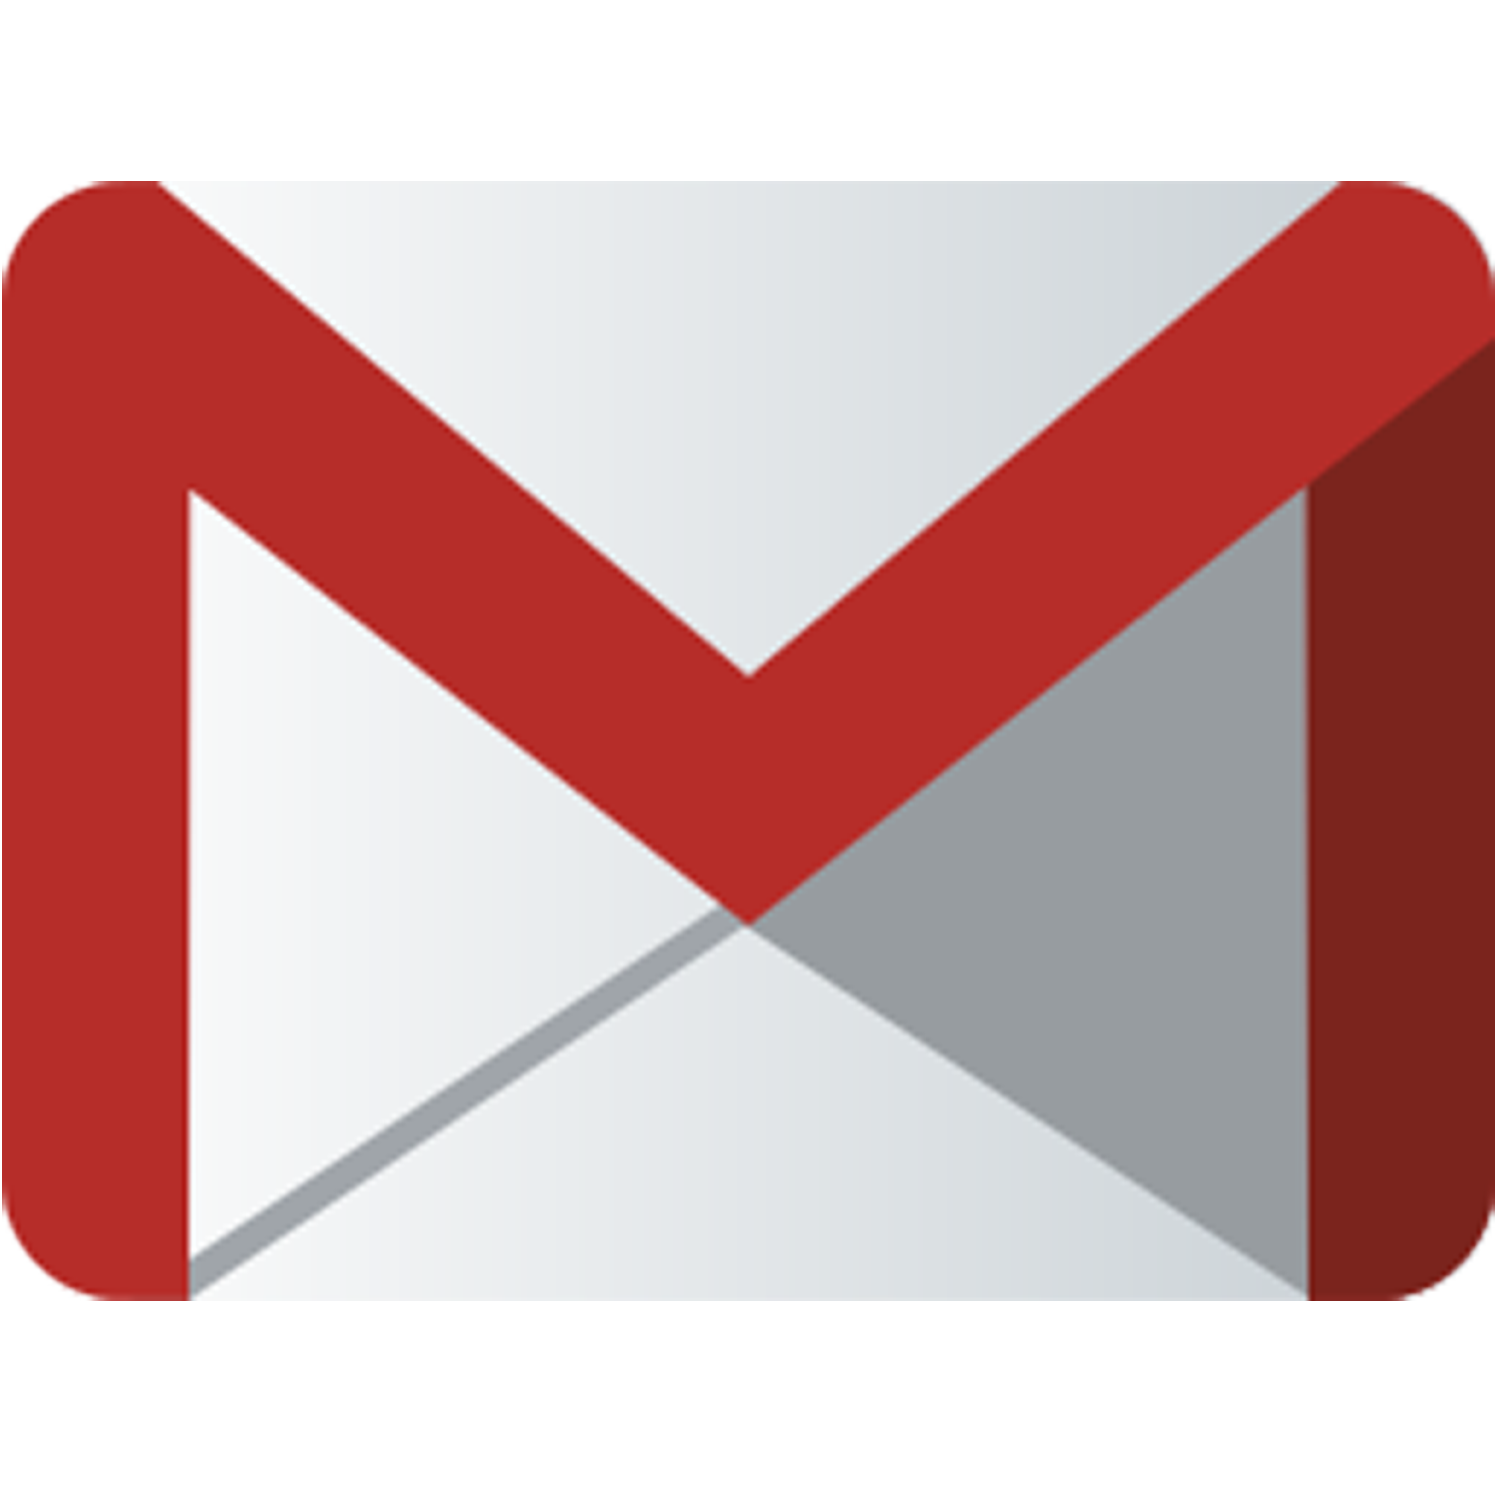 Mailbox Provider Mail Gmail Email Yahoo! PNG Image